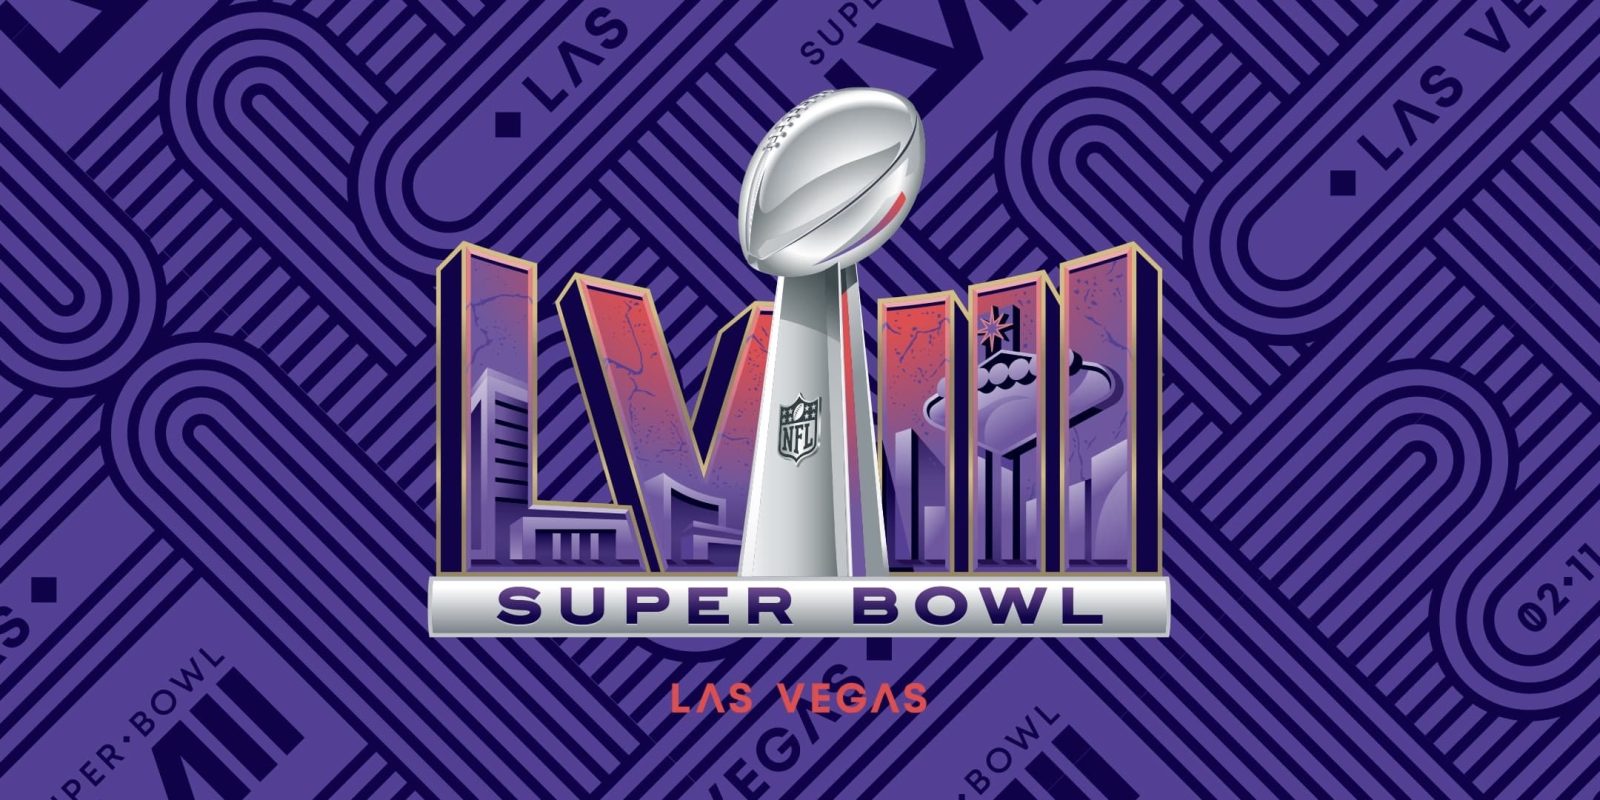 Super bowl lviii how to watch for free on apple